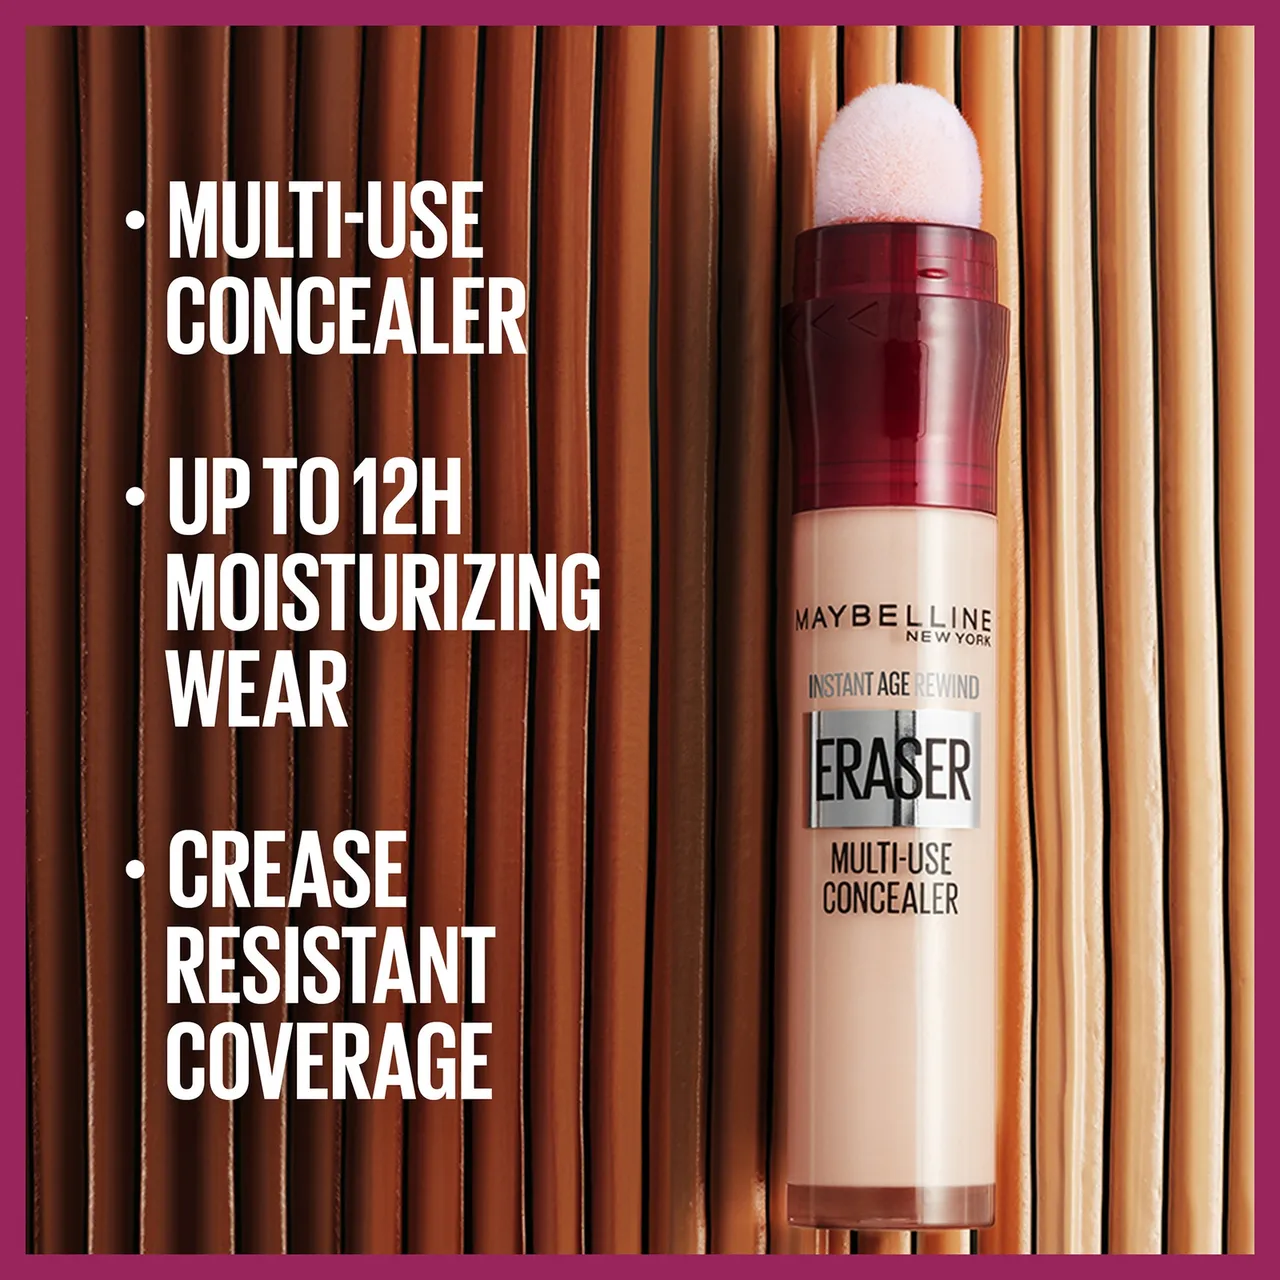 Maybelline Instant Anti Age Eraser Concealer 6.8ml (Various Shades) - 095 Cool Ivory